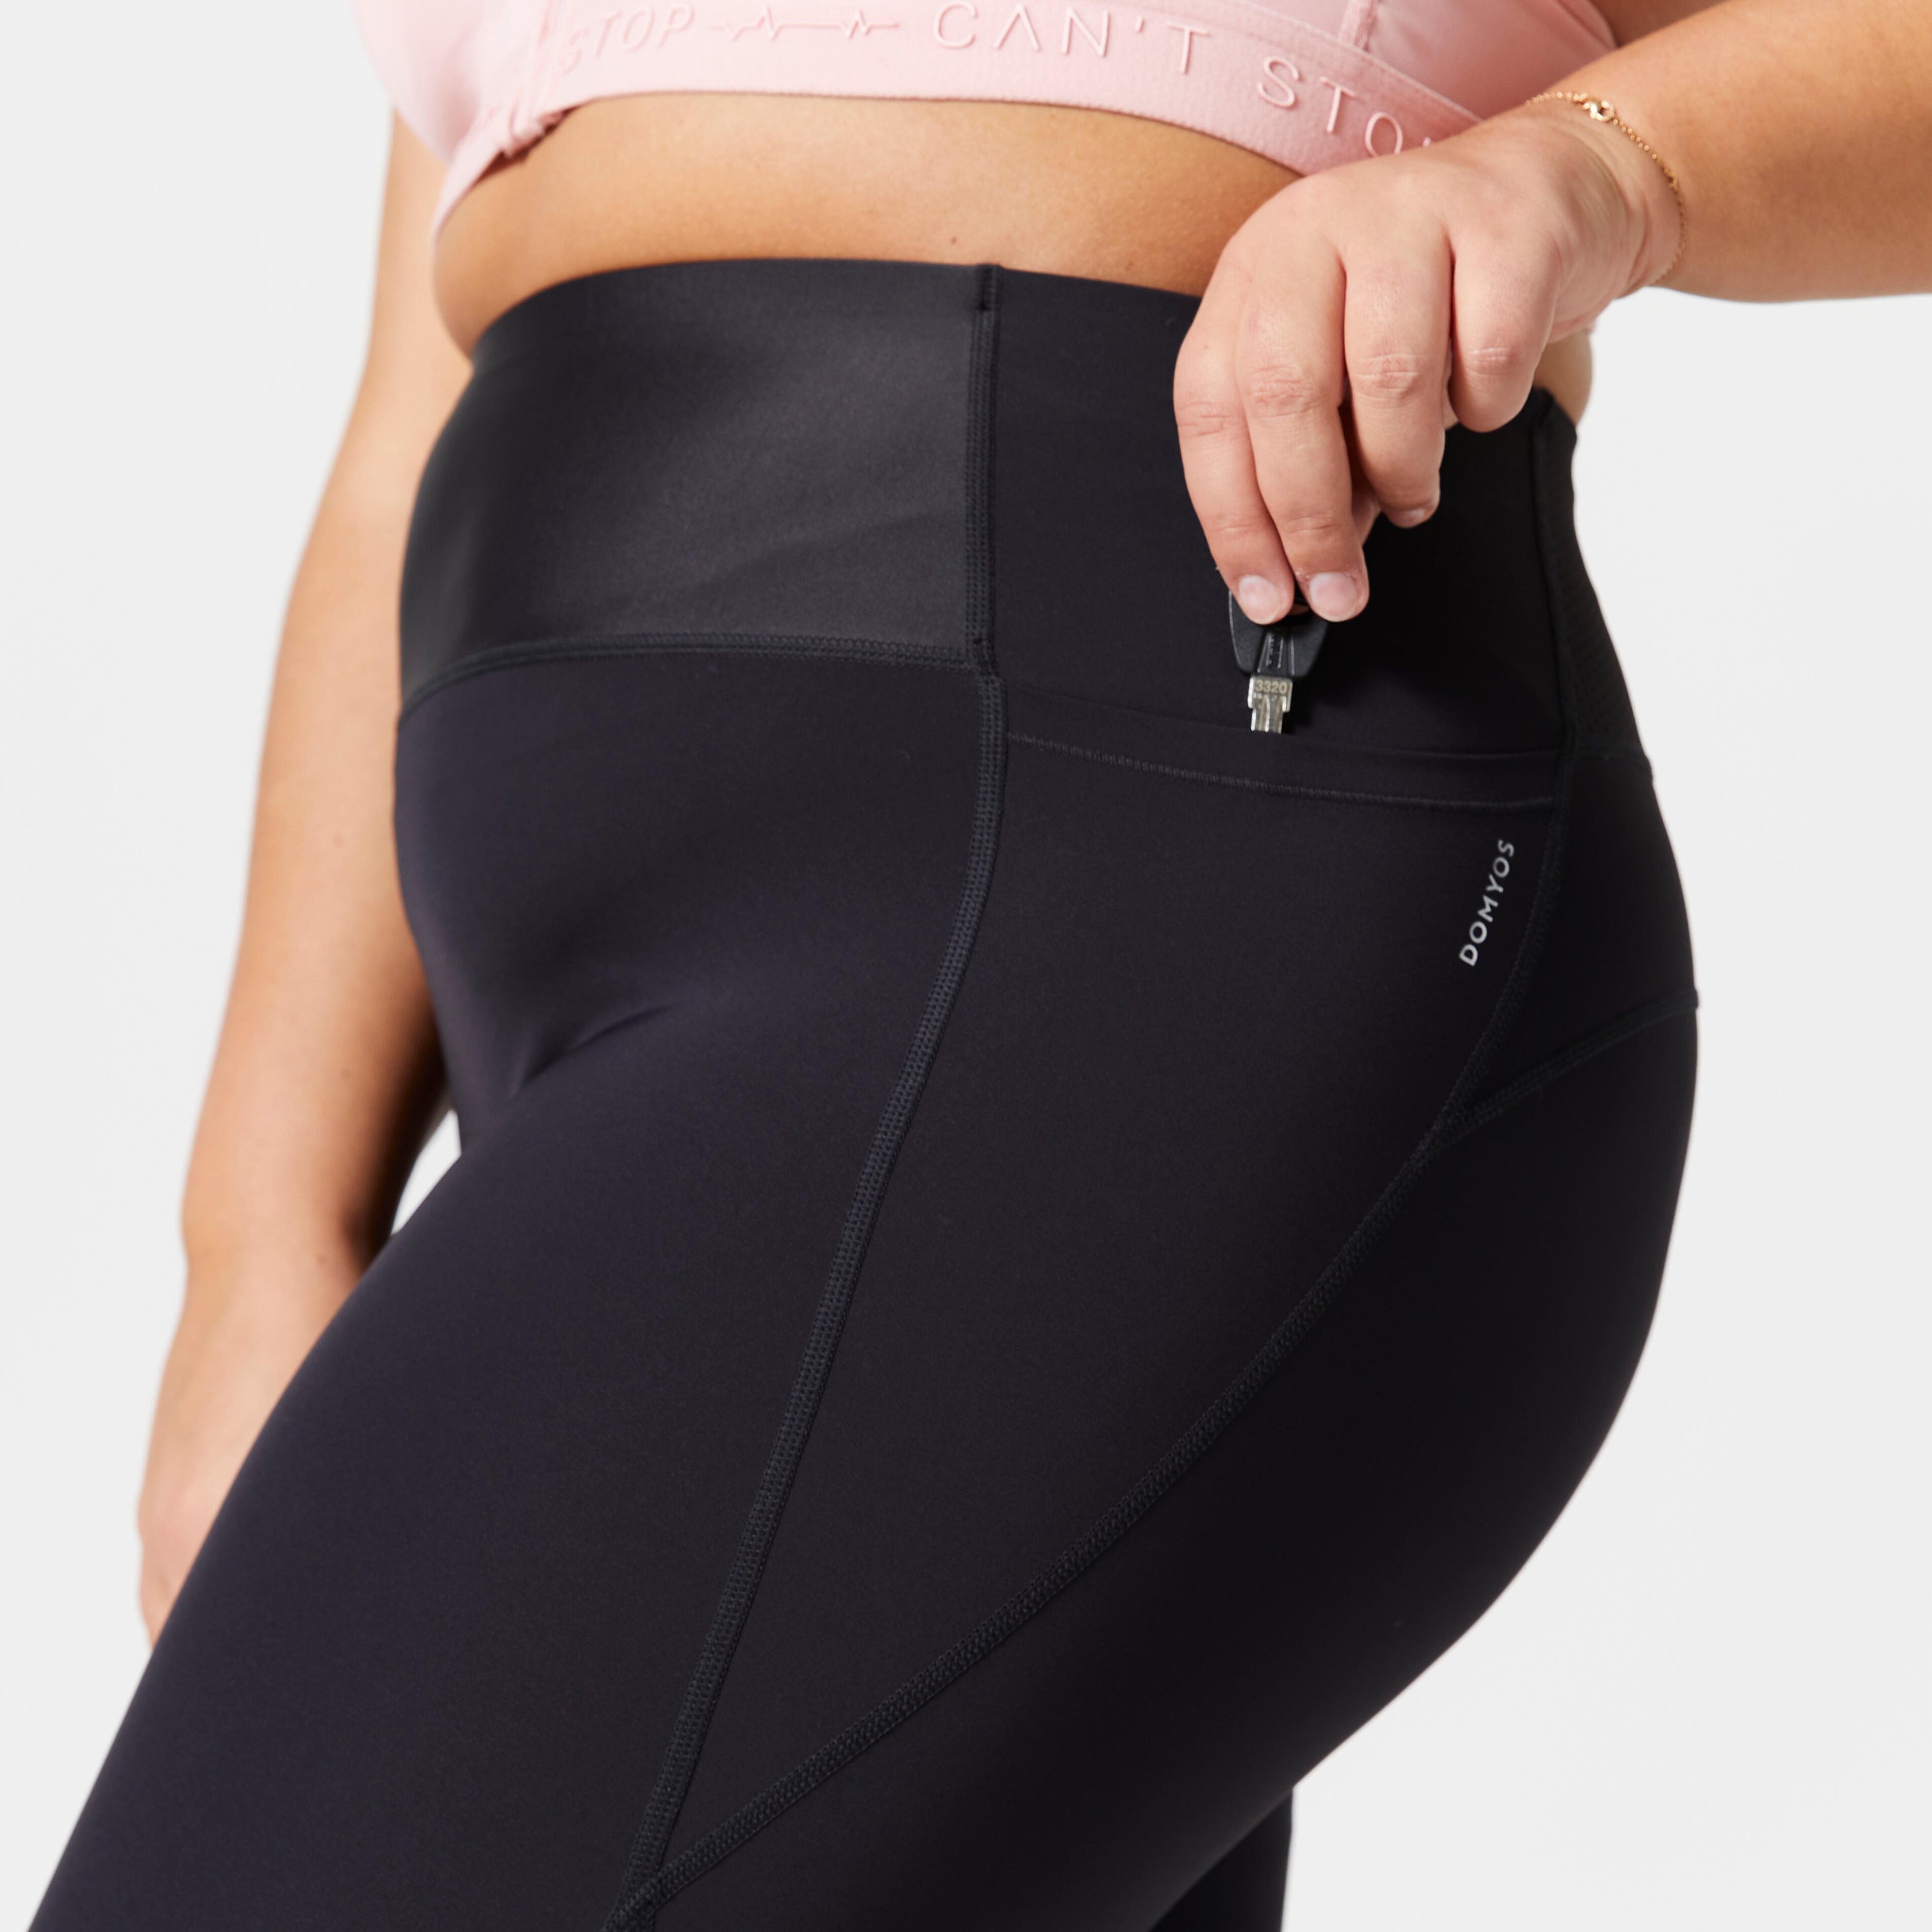 Decathlon launches 'leggings for everyone' as part of body positive gym  range